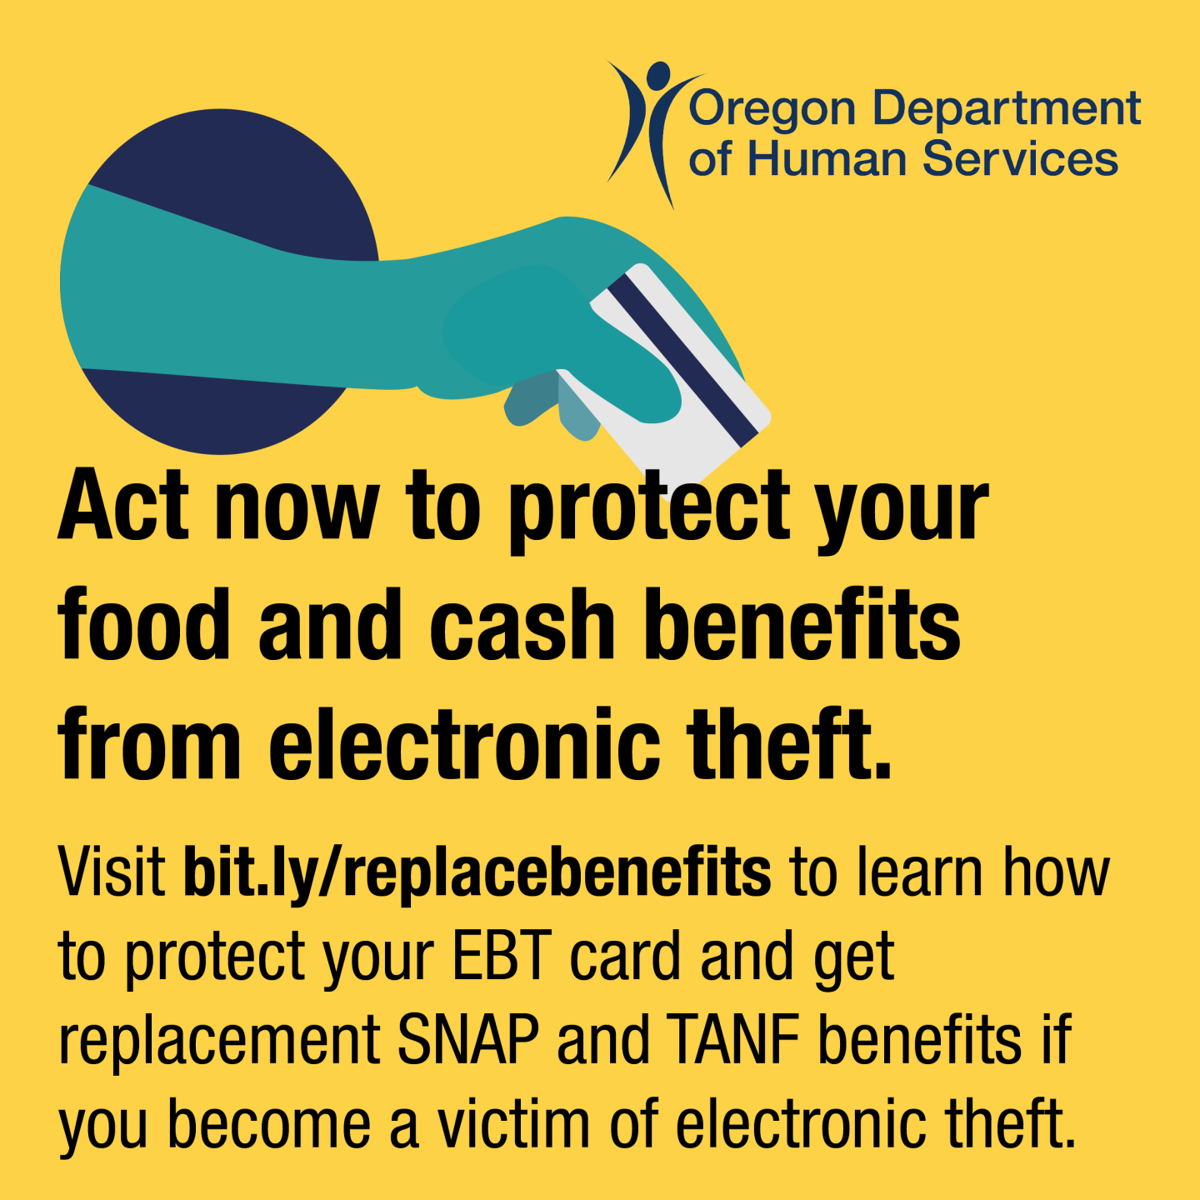 Learn How to Apply for EBT Card